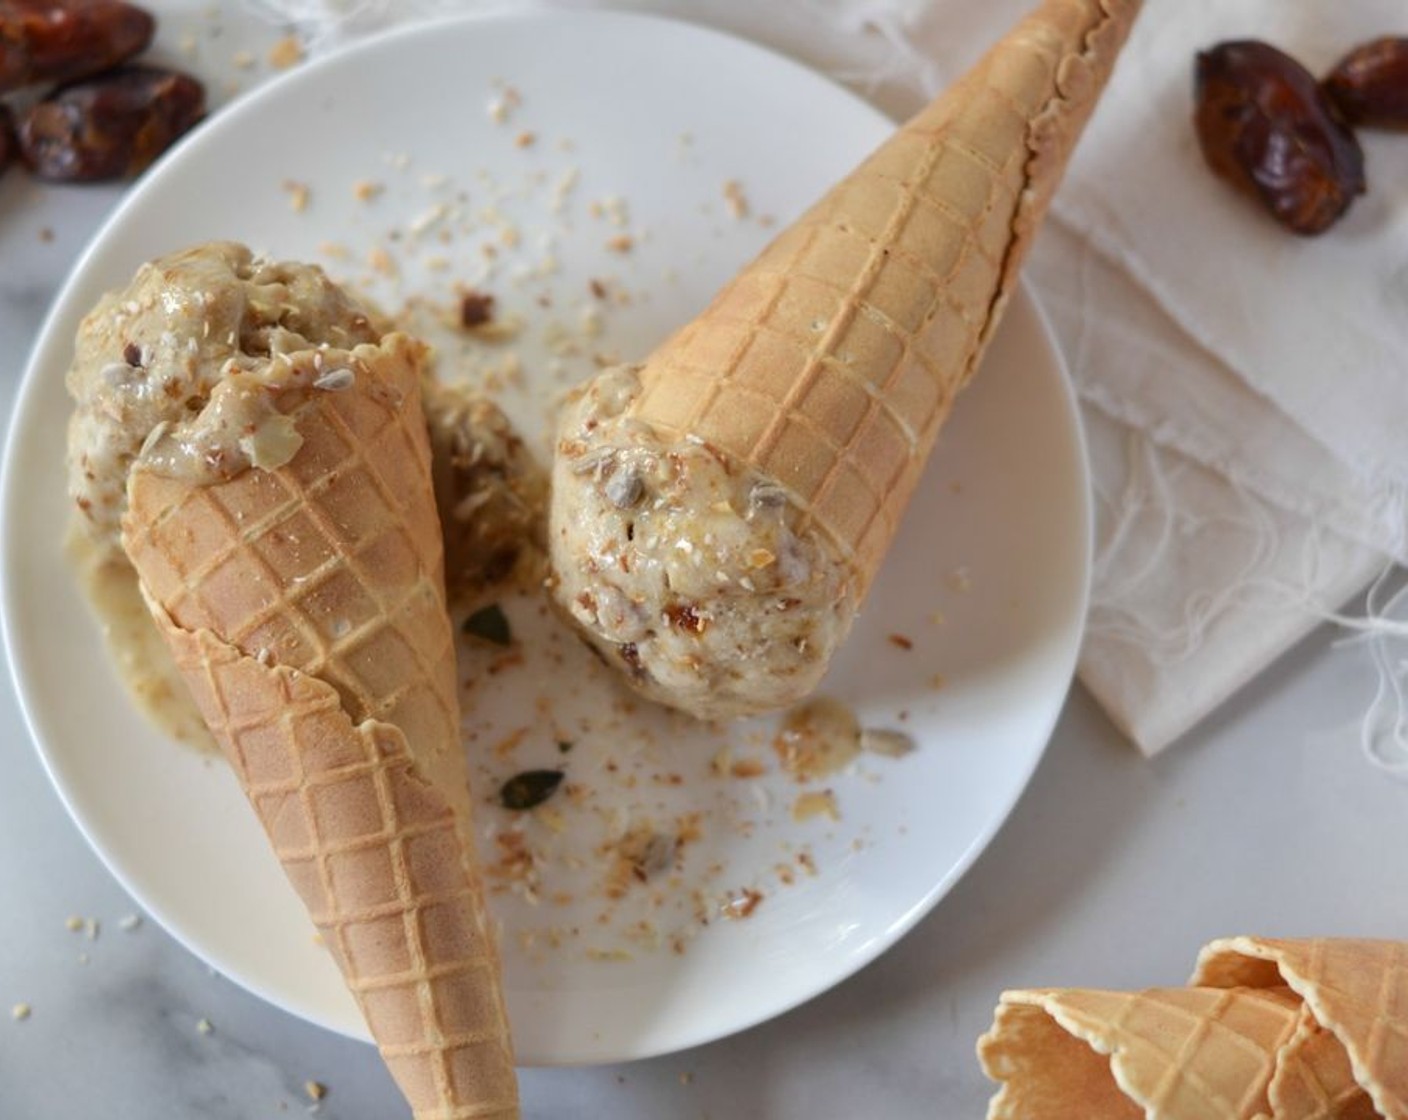 step 3 Blitz until smooth and serve the date “toffee” alongside the ice cream while its still warm. Scoop the ice cream into Ice Cream Cones (8), add a scatter of toasted Unsweetened Coconut Flakes (to taste), a spoonful of toffee sauce and serve immediately.